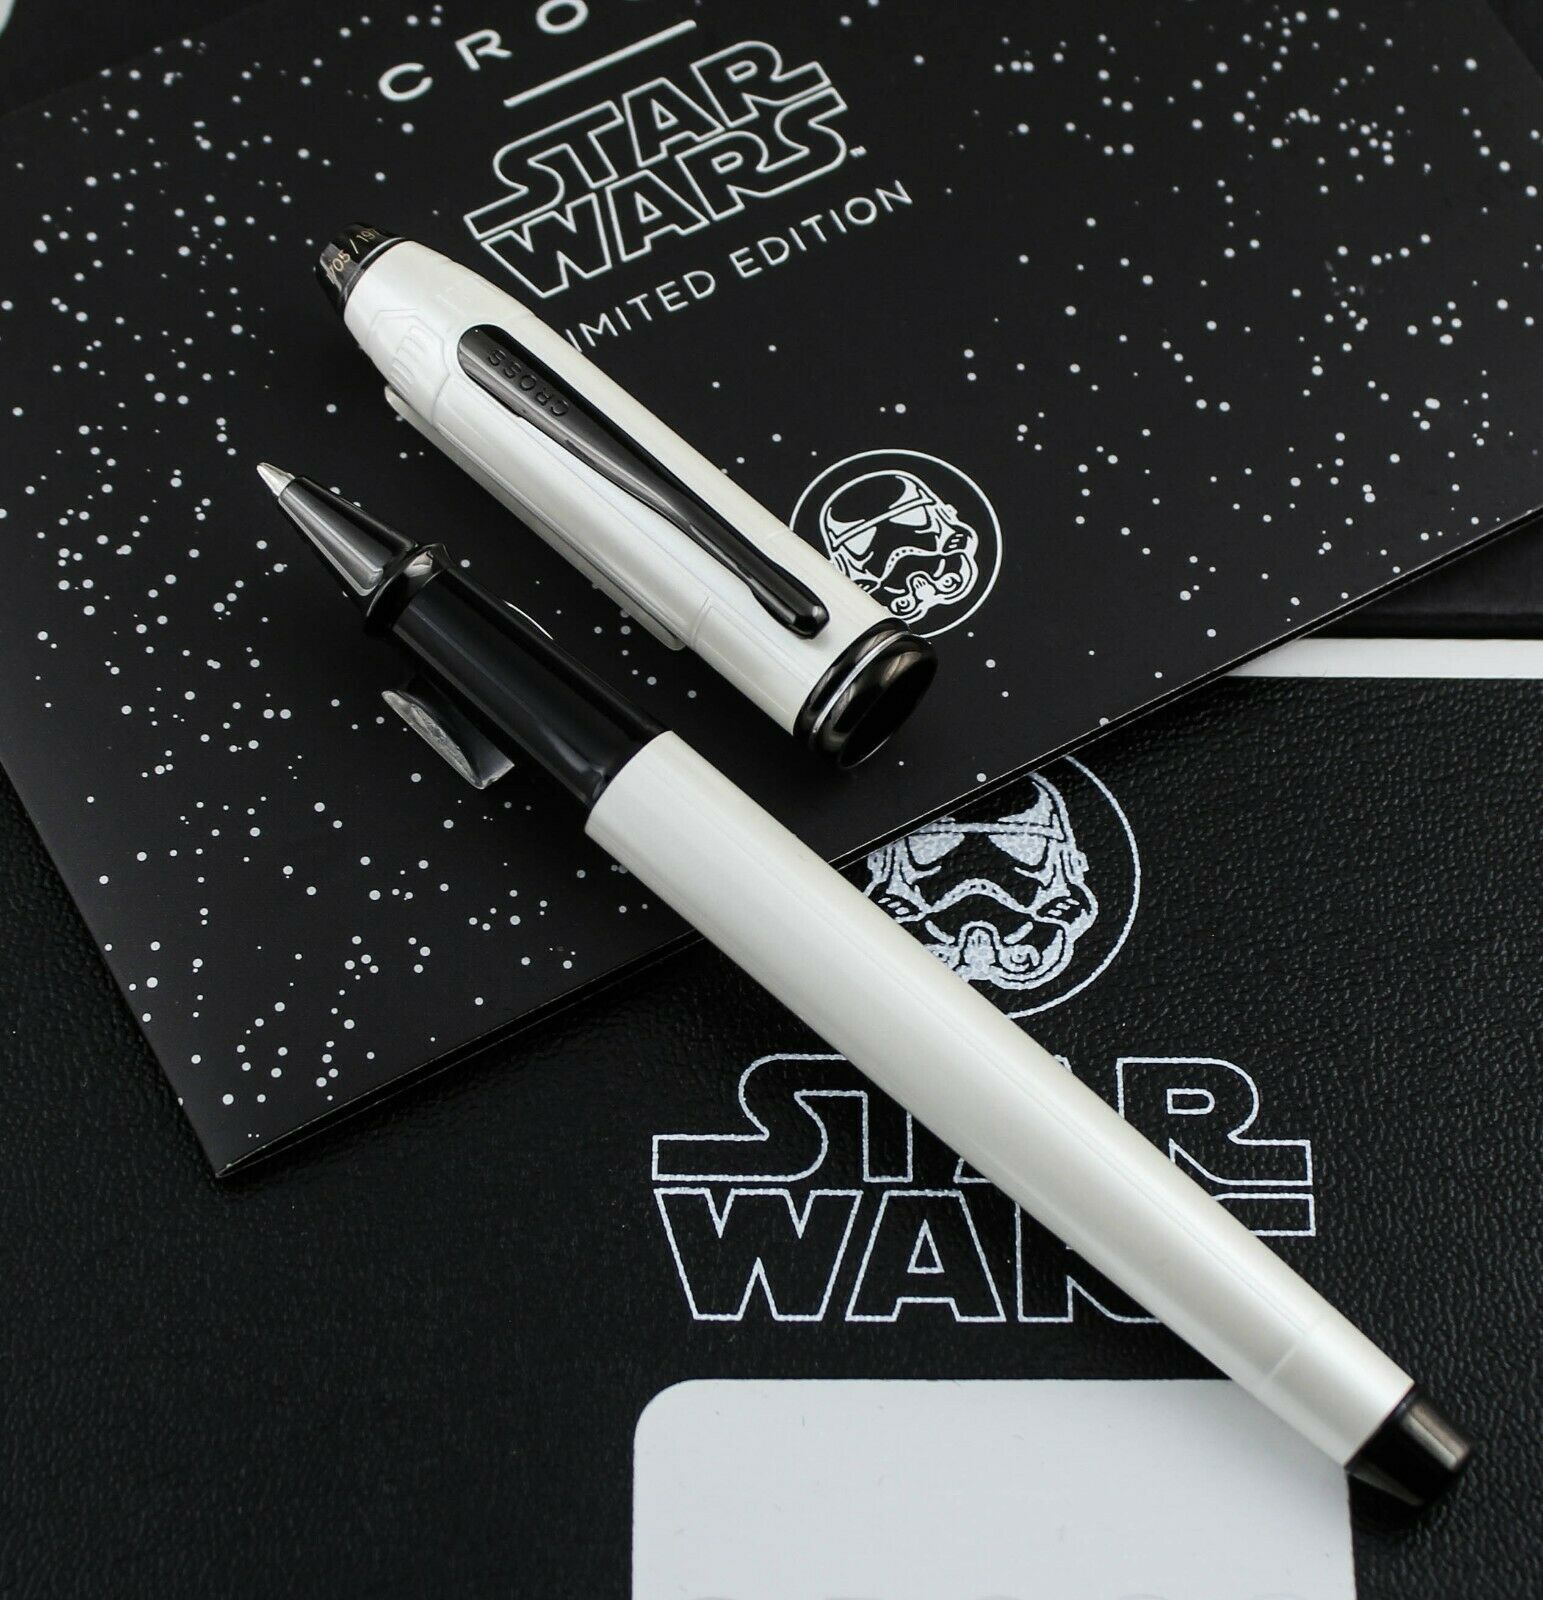 Why I Bought the Cross Townsend Star Wars Limited Edition Fountain